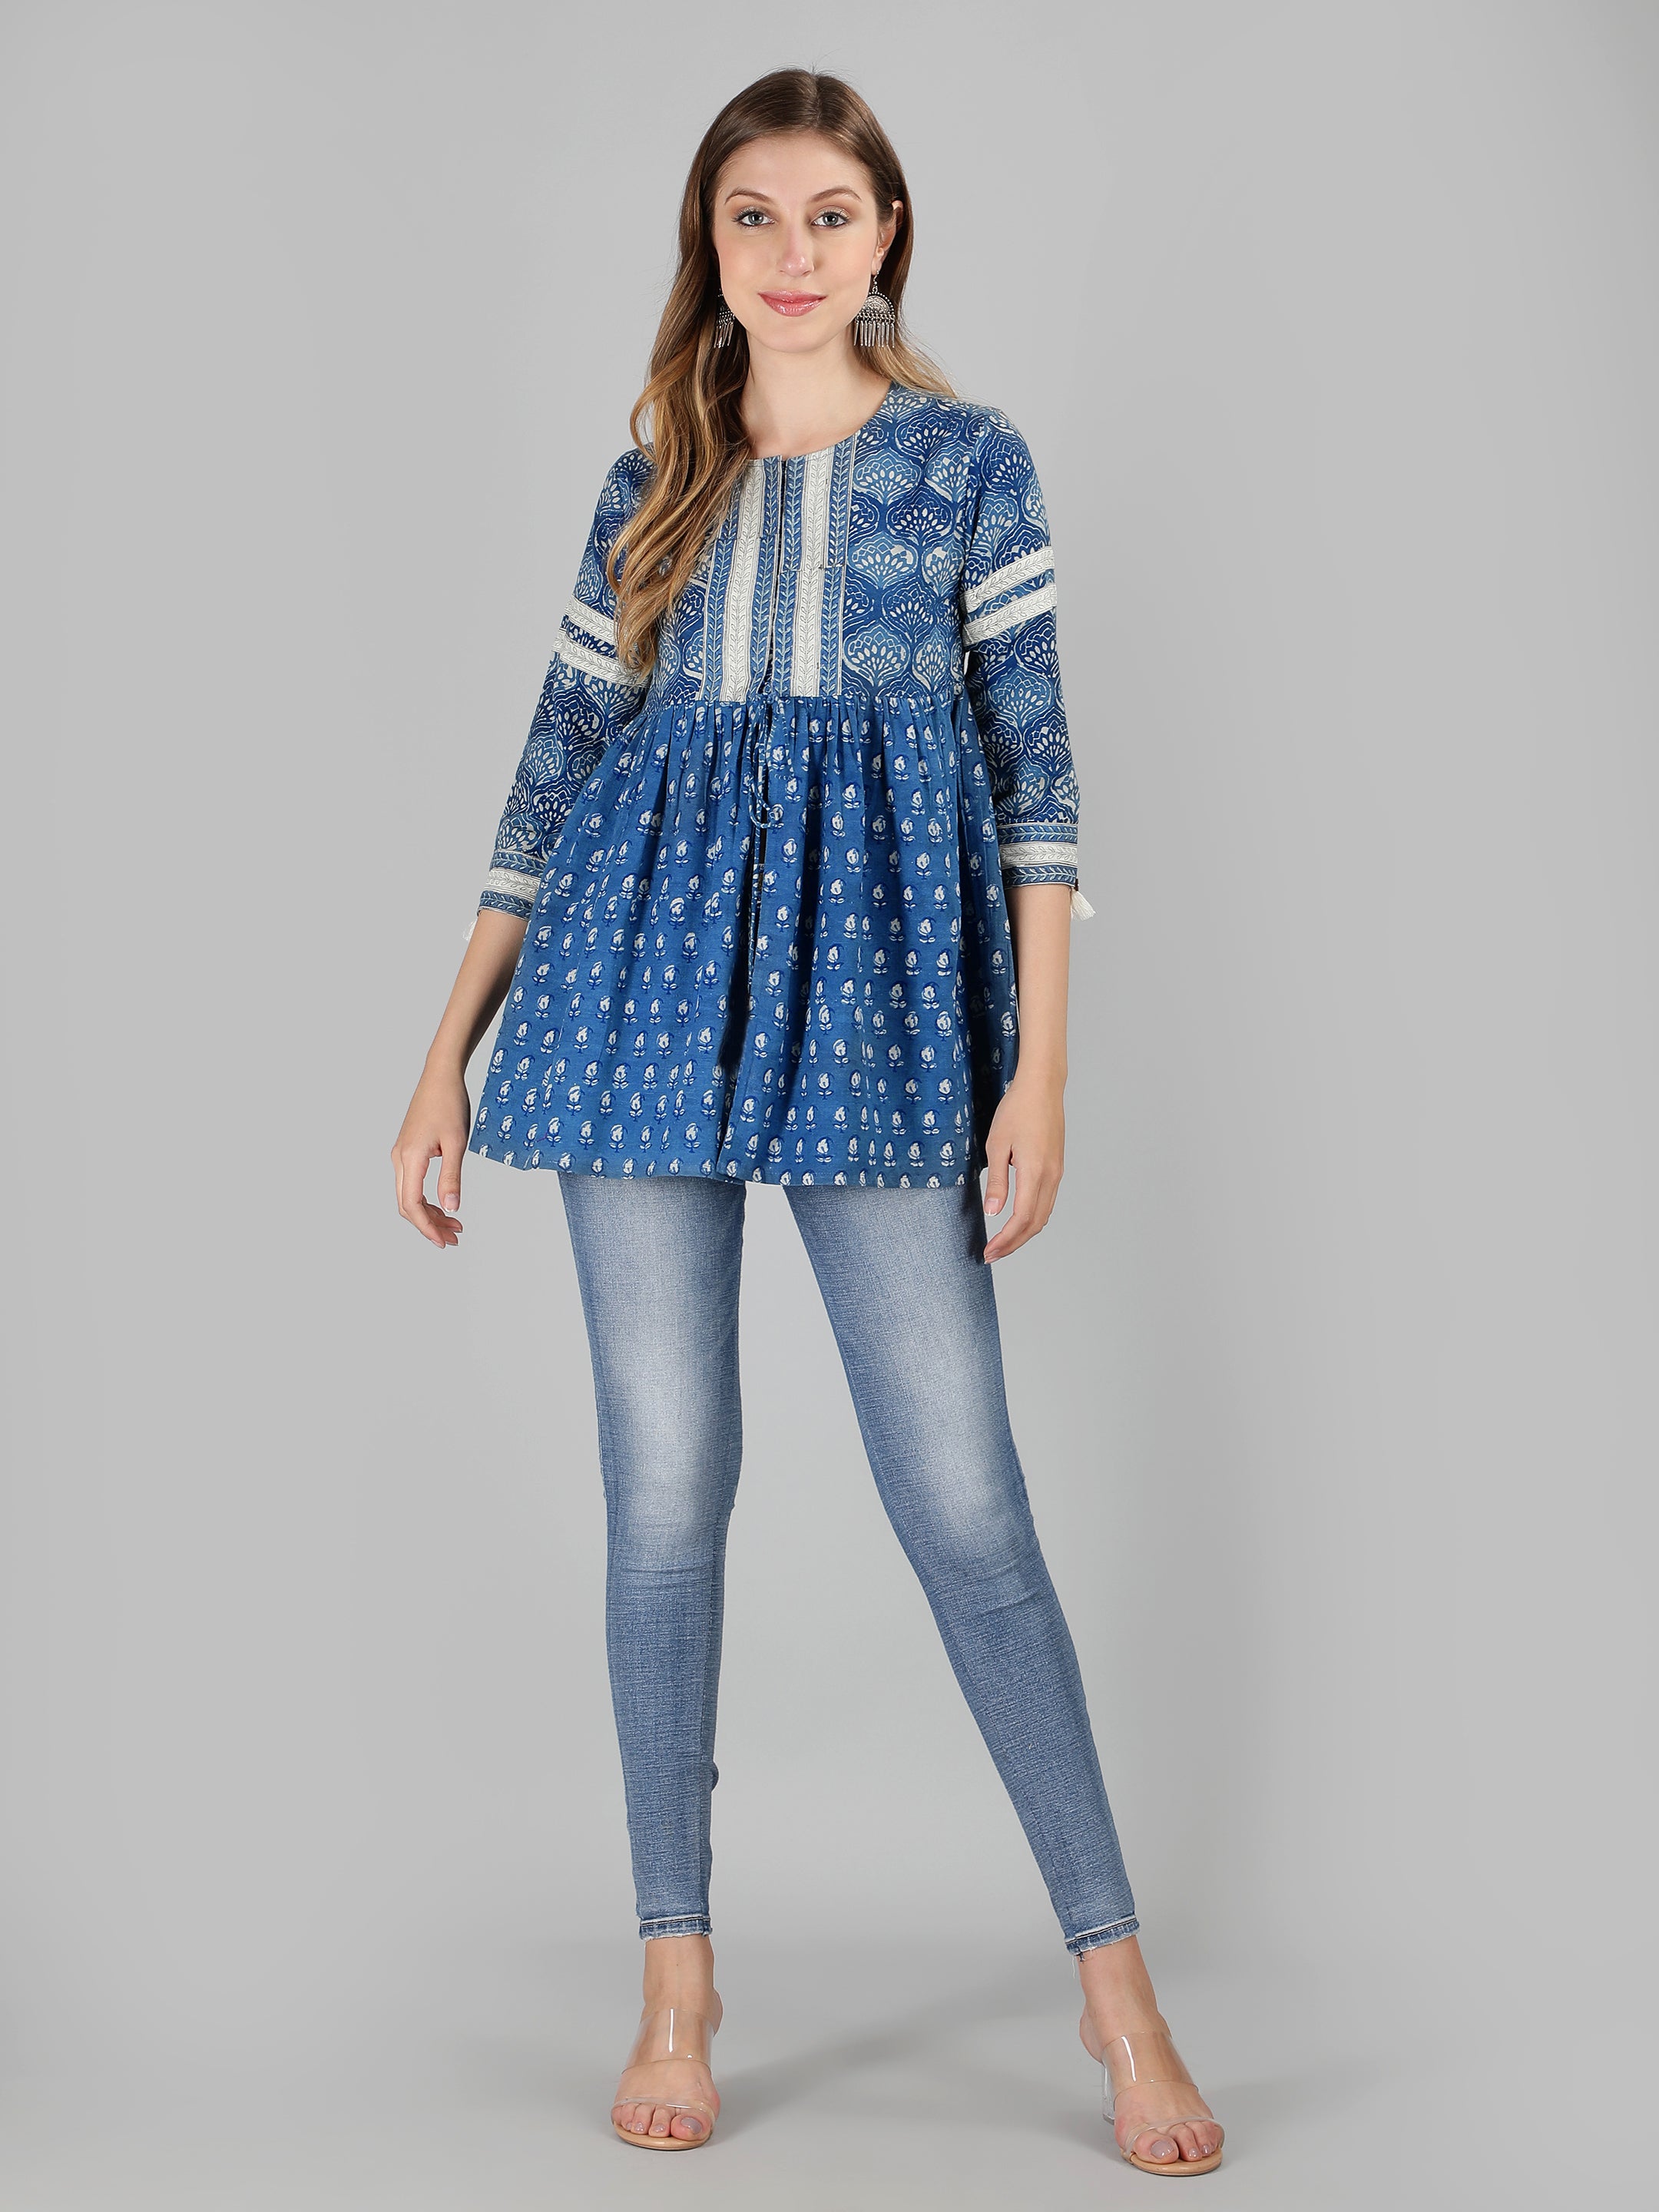 bring-a-touch-of-sophistication-to-your-wardrobe-with-this-gorgeous-cotton-peplum-top-made-from-soft-and-breathable-cotton-this-top-is-both-comfortable-and-stylish-making-it-the-perfect-addition-to-your-everyday-wardrobe